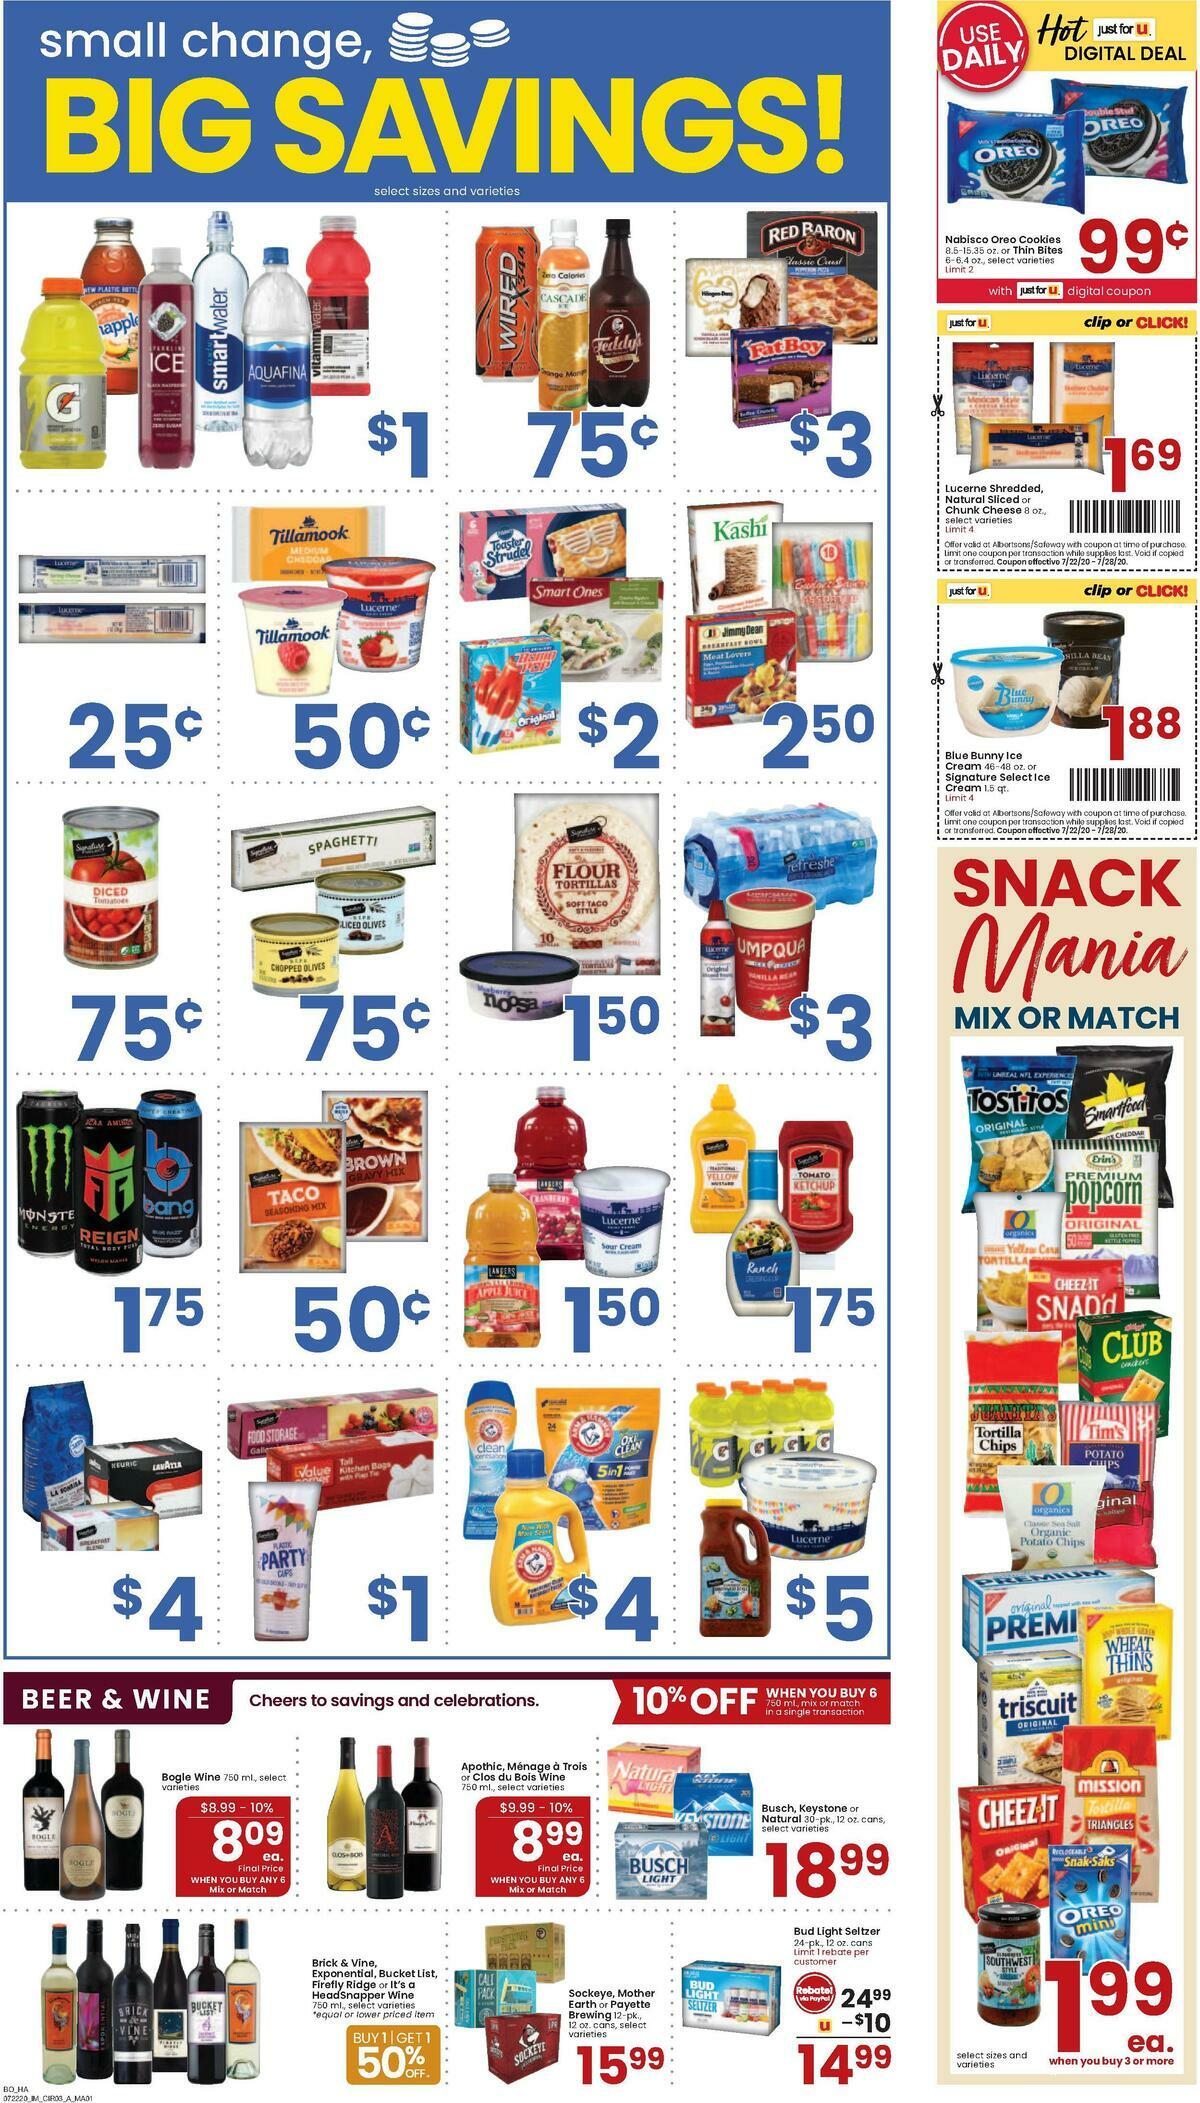 Albertsons Weekly Ad from July 22